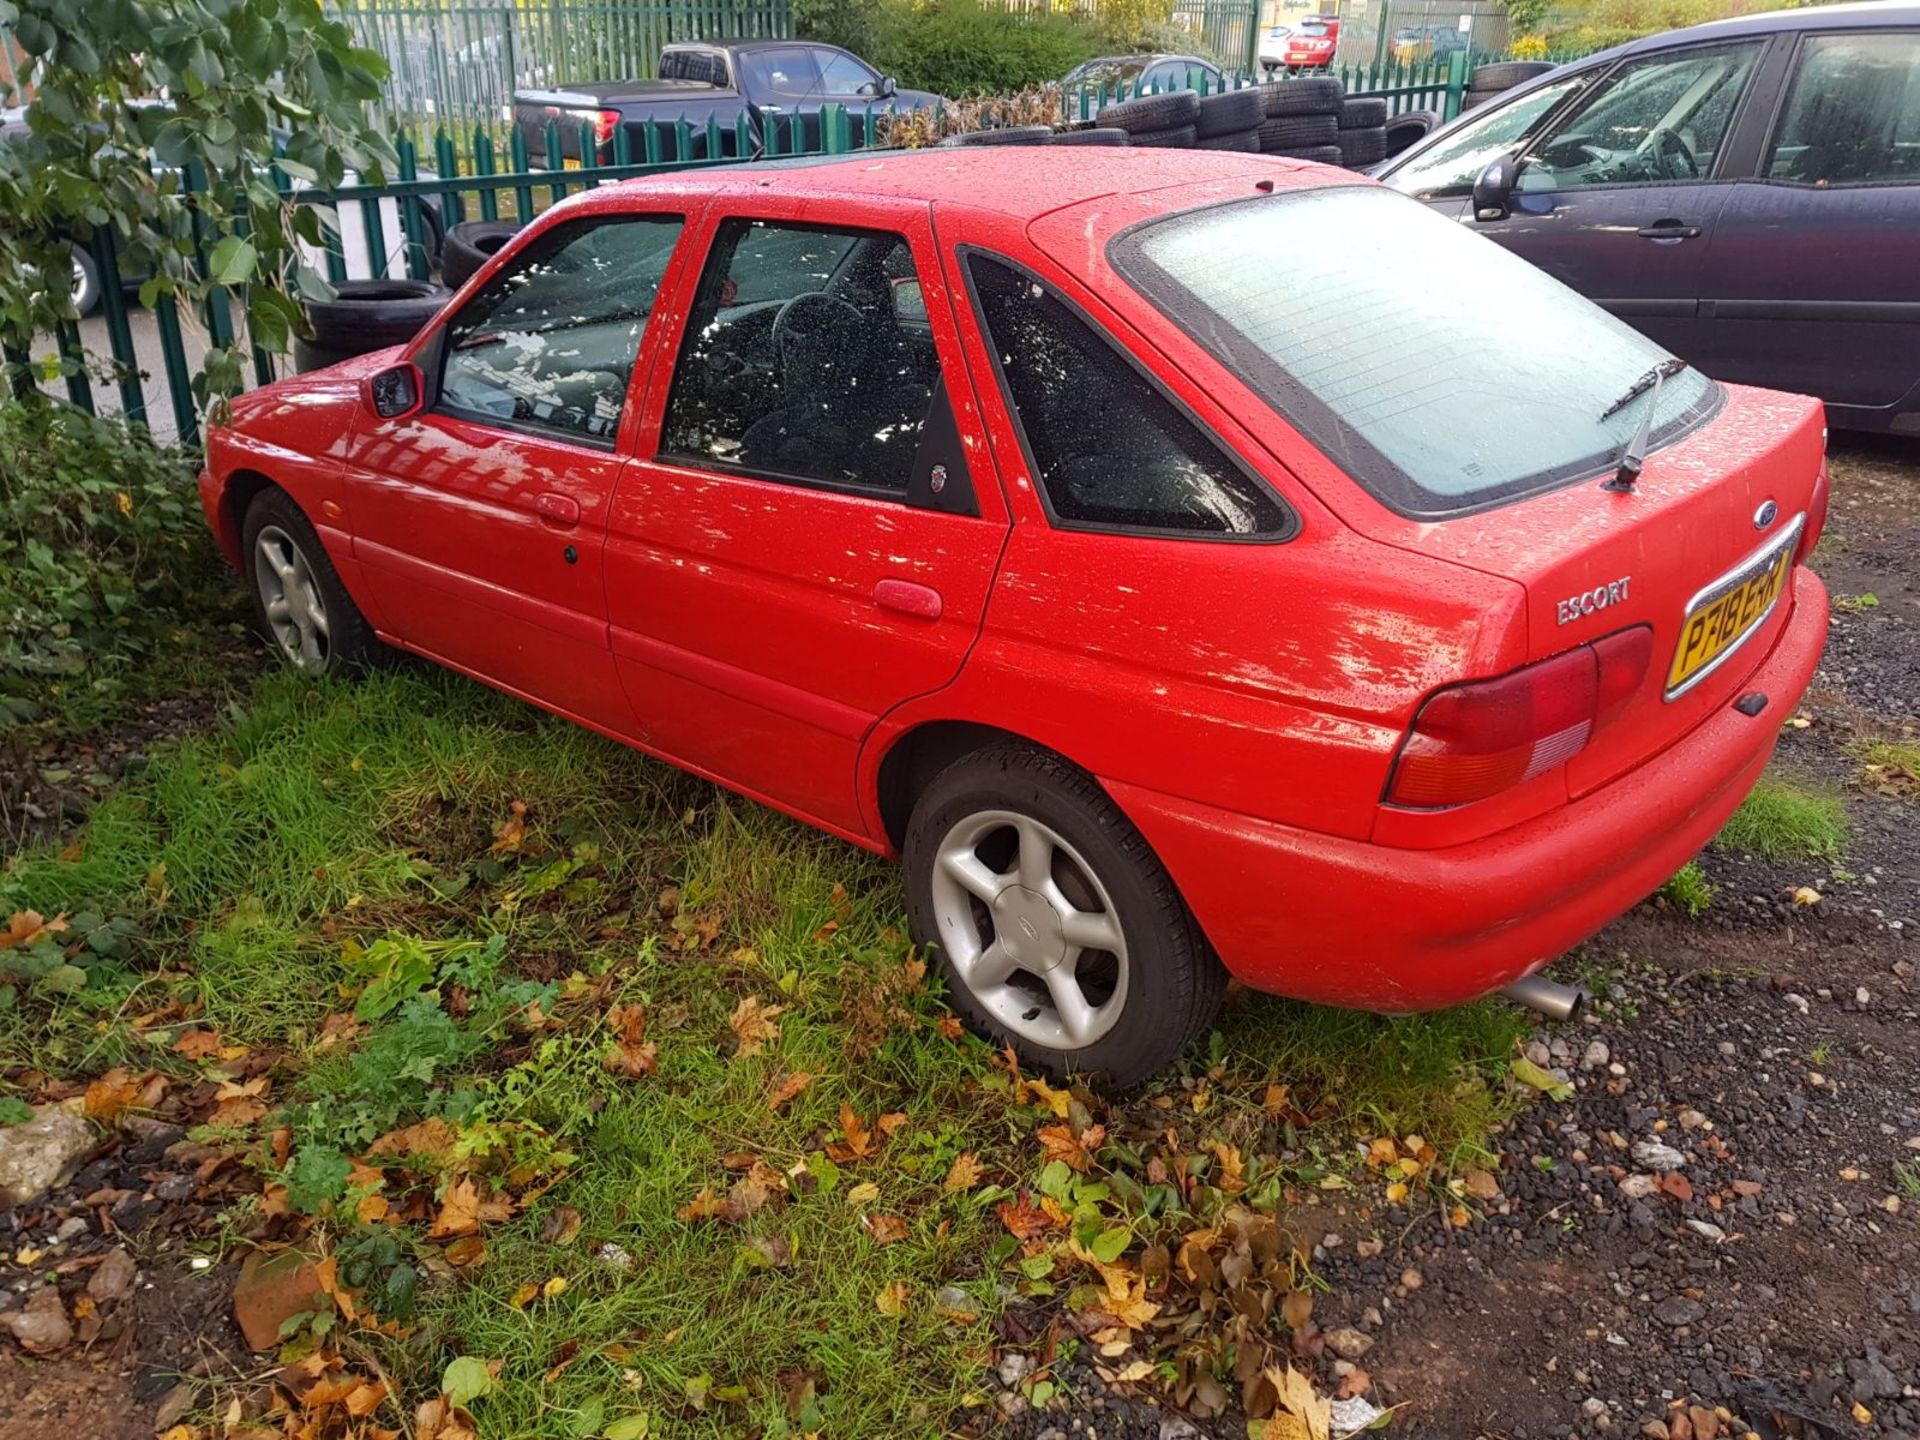 1996/P REG FORD ESCORT GHIA 1.8 PETROL, LOW MILES AND V5 PRESENT *NO VAT* - Image 2 of 6